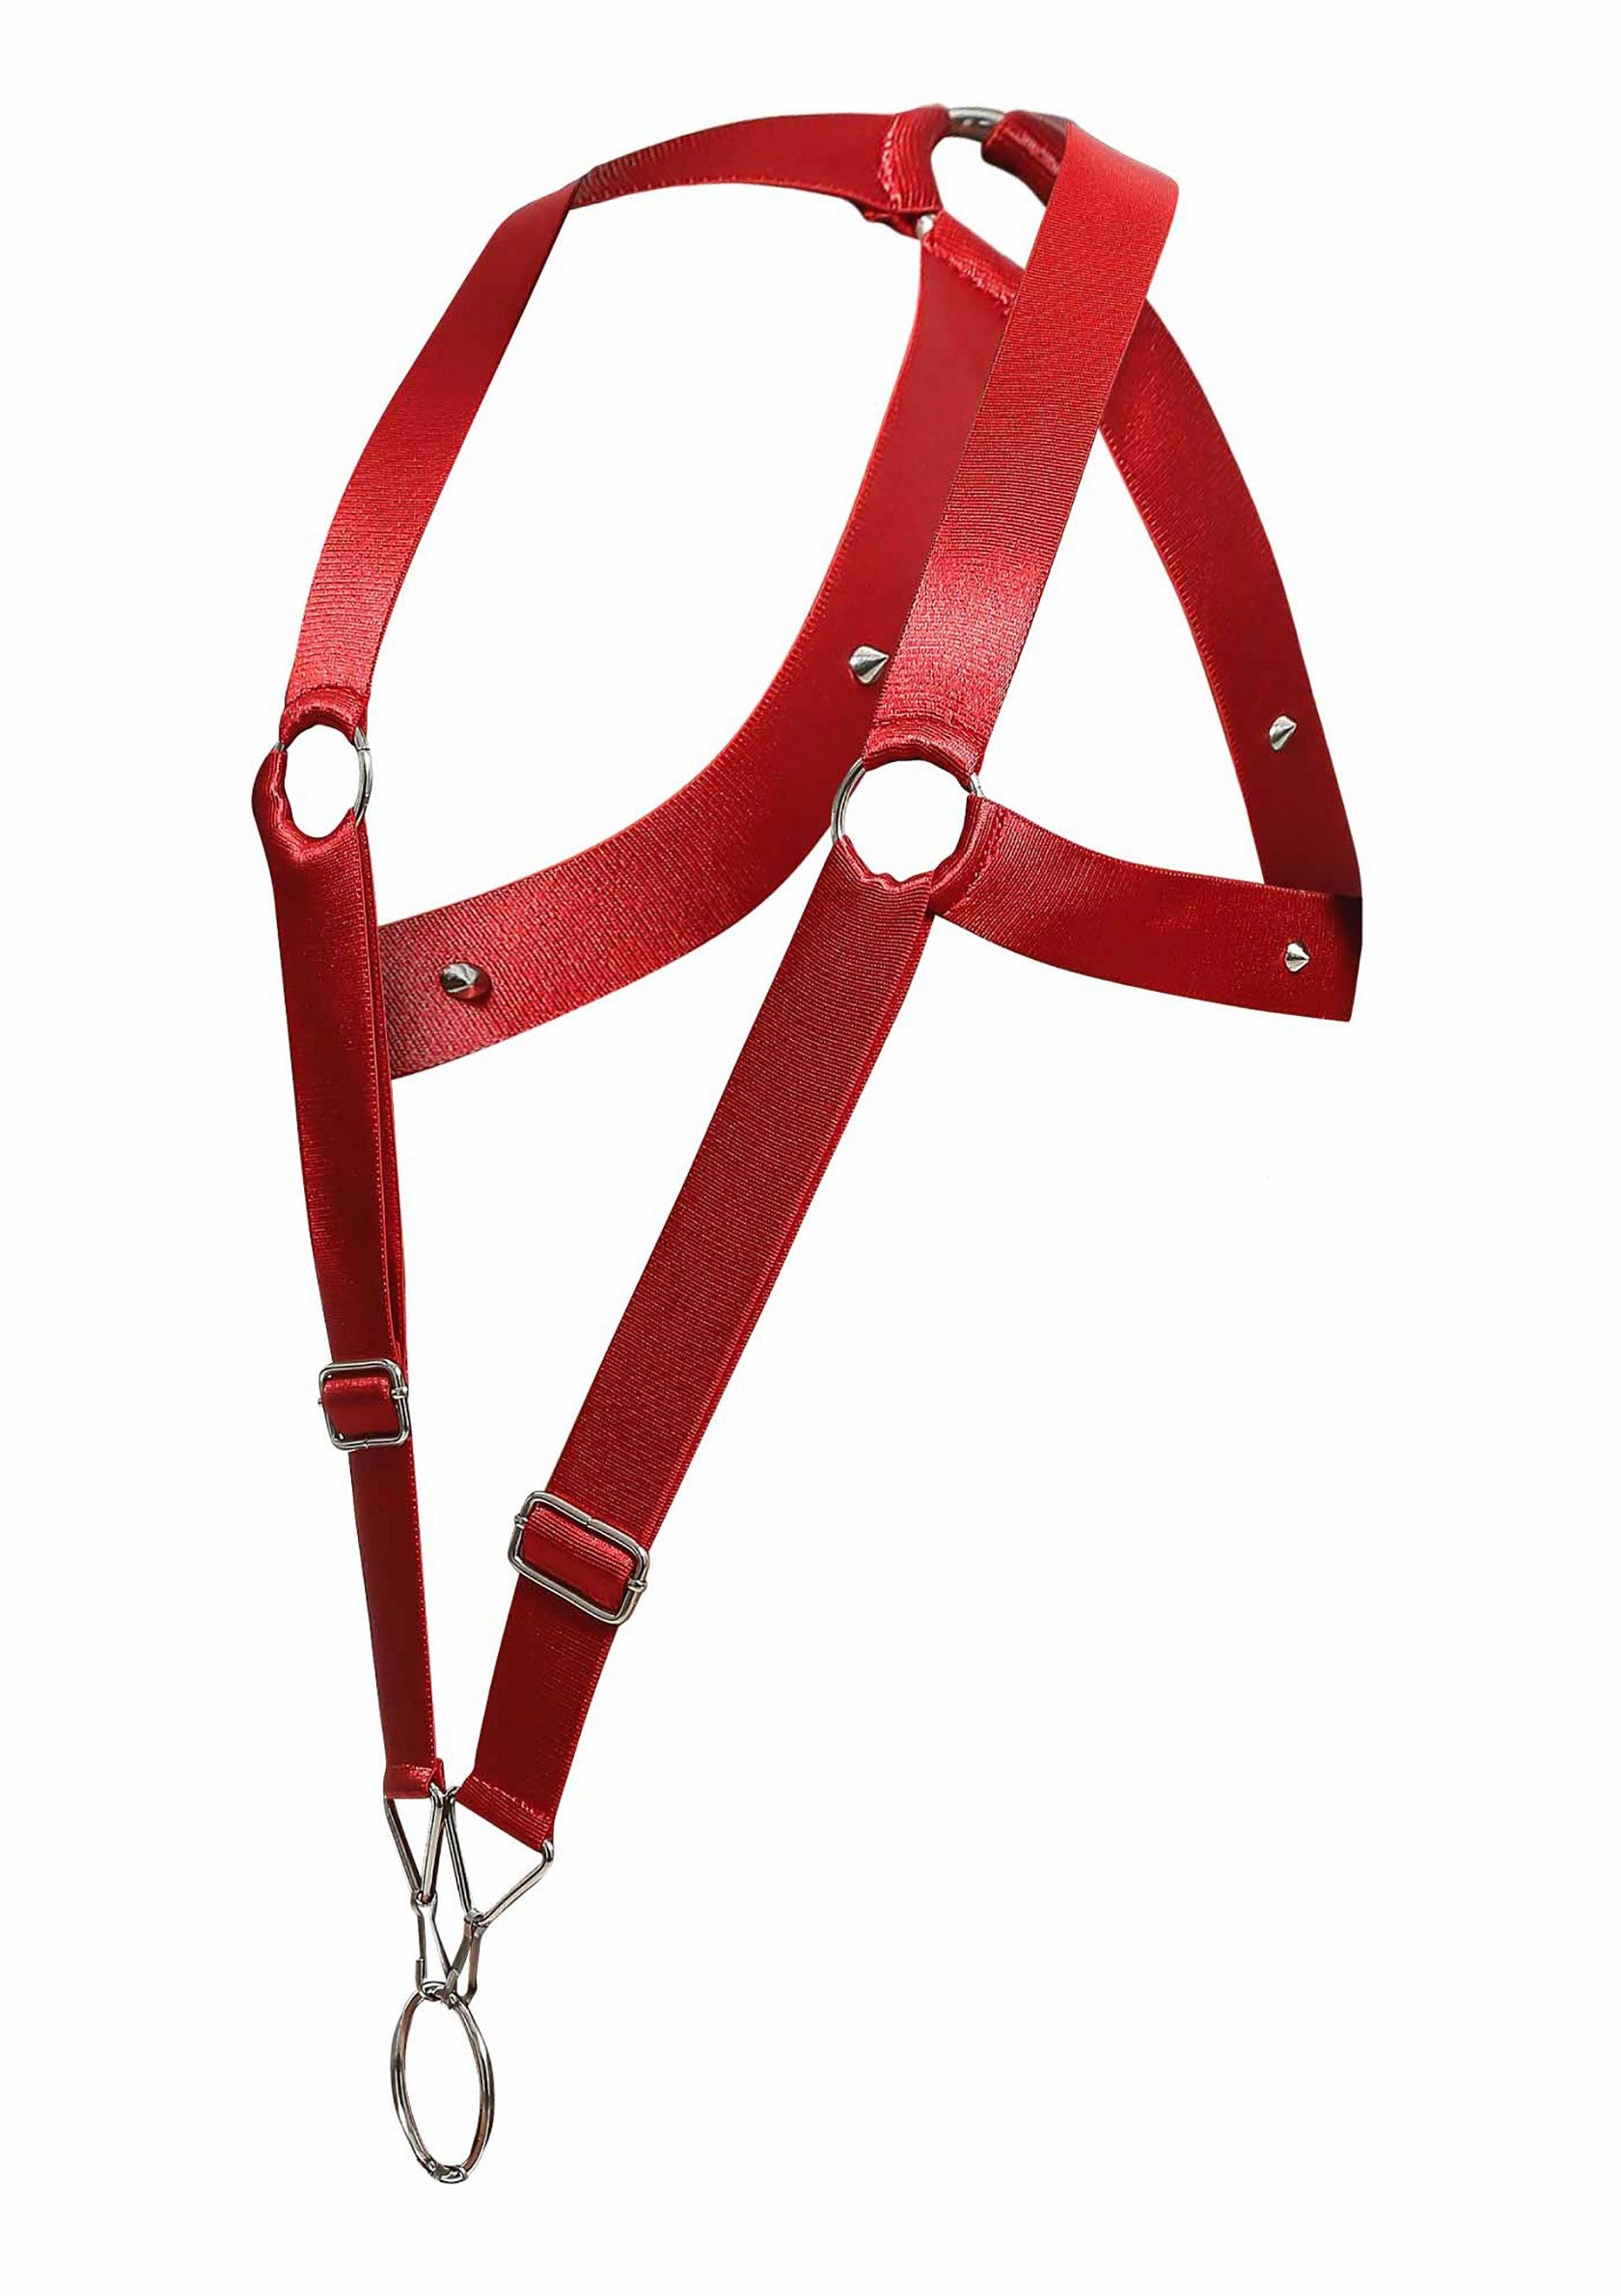 MOB Eroticwear Dngeon Crossback Harness RED O/S - 7